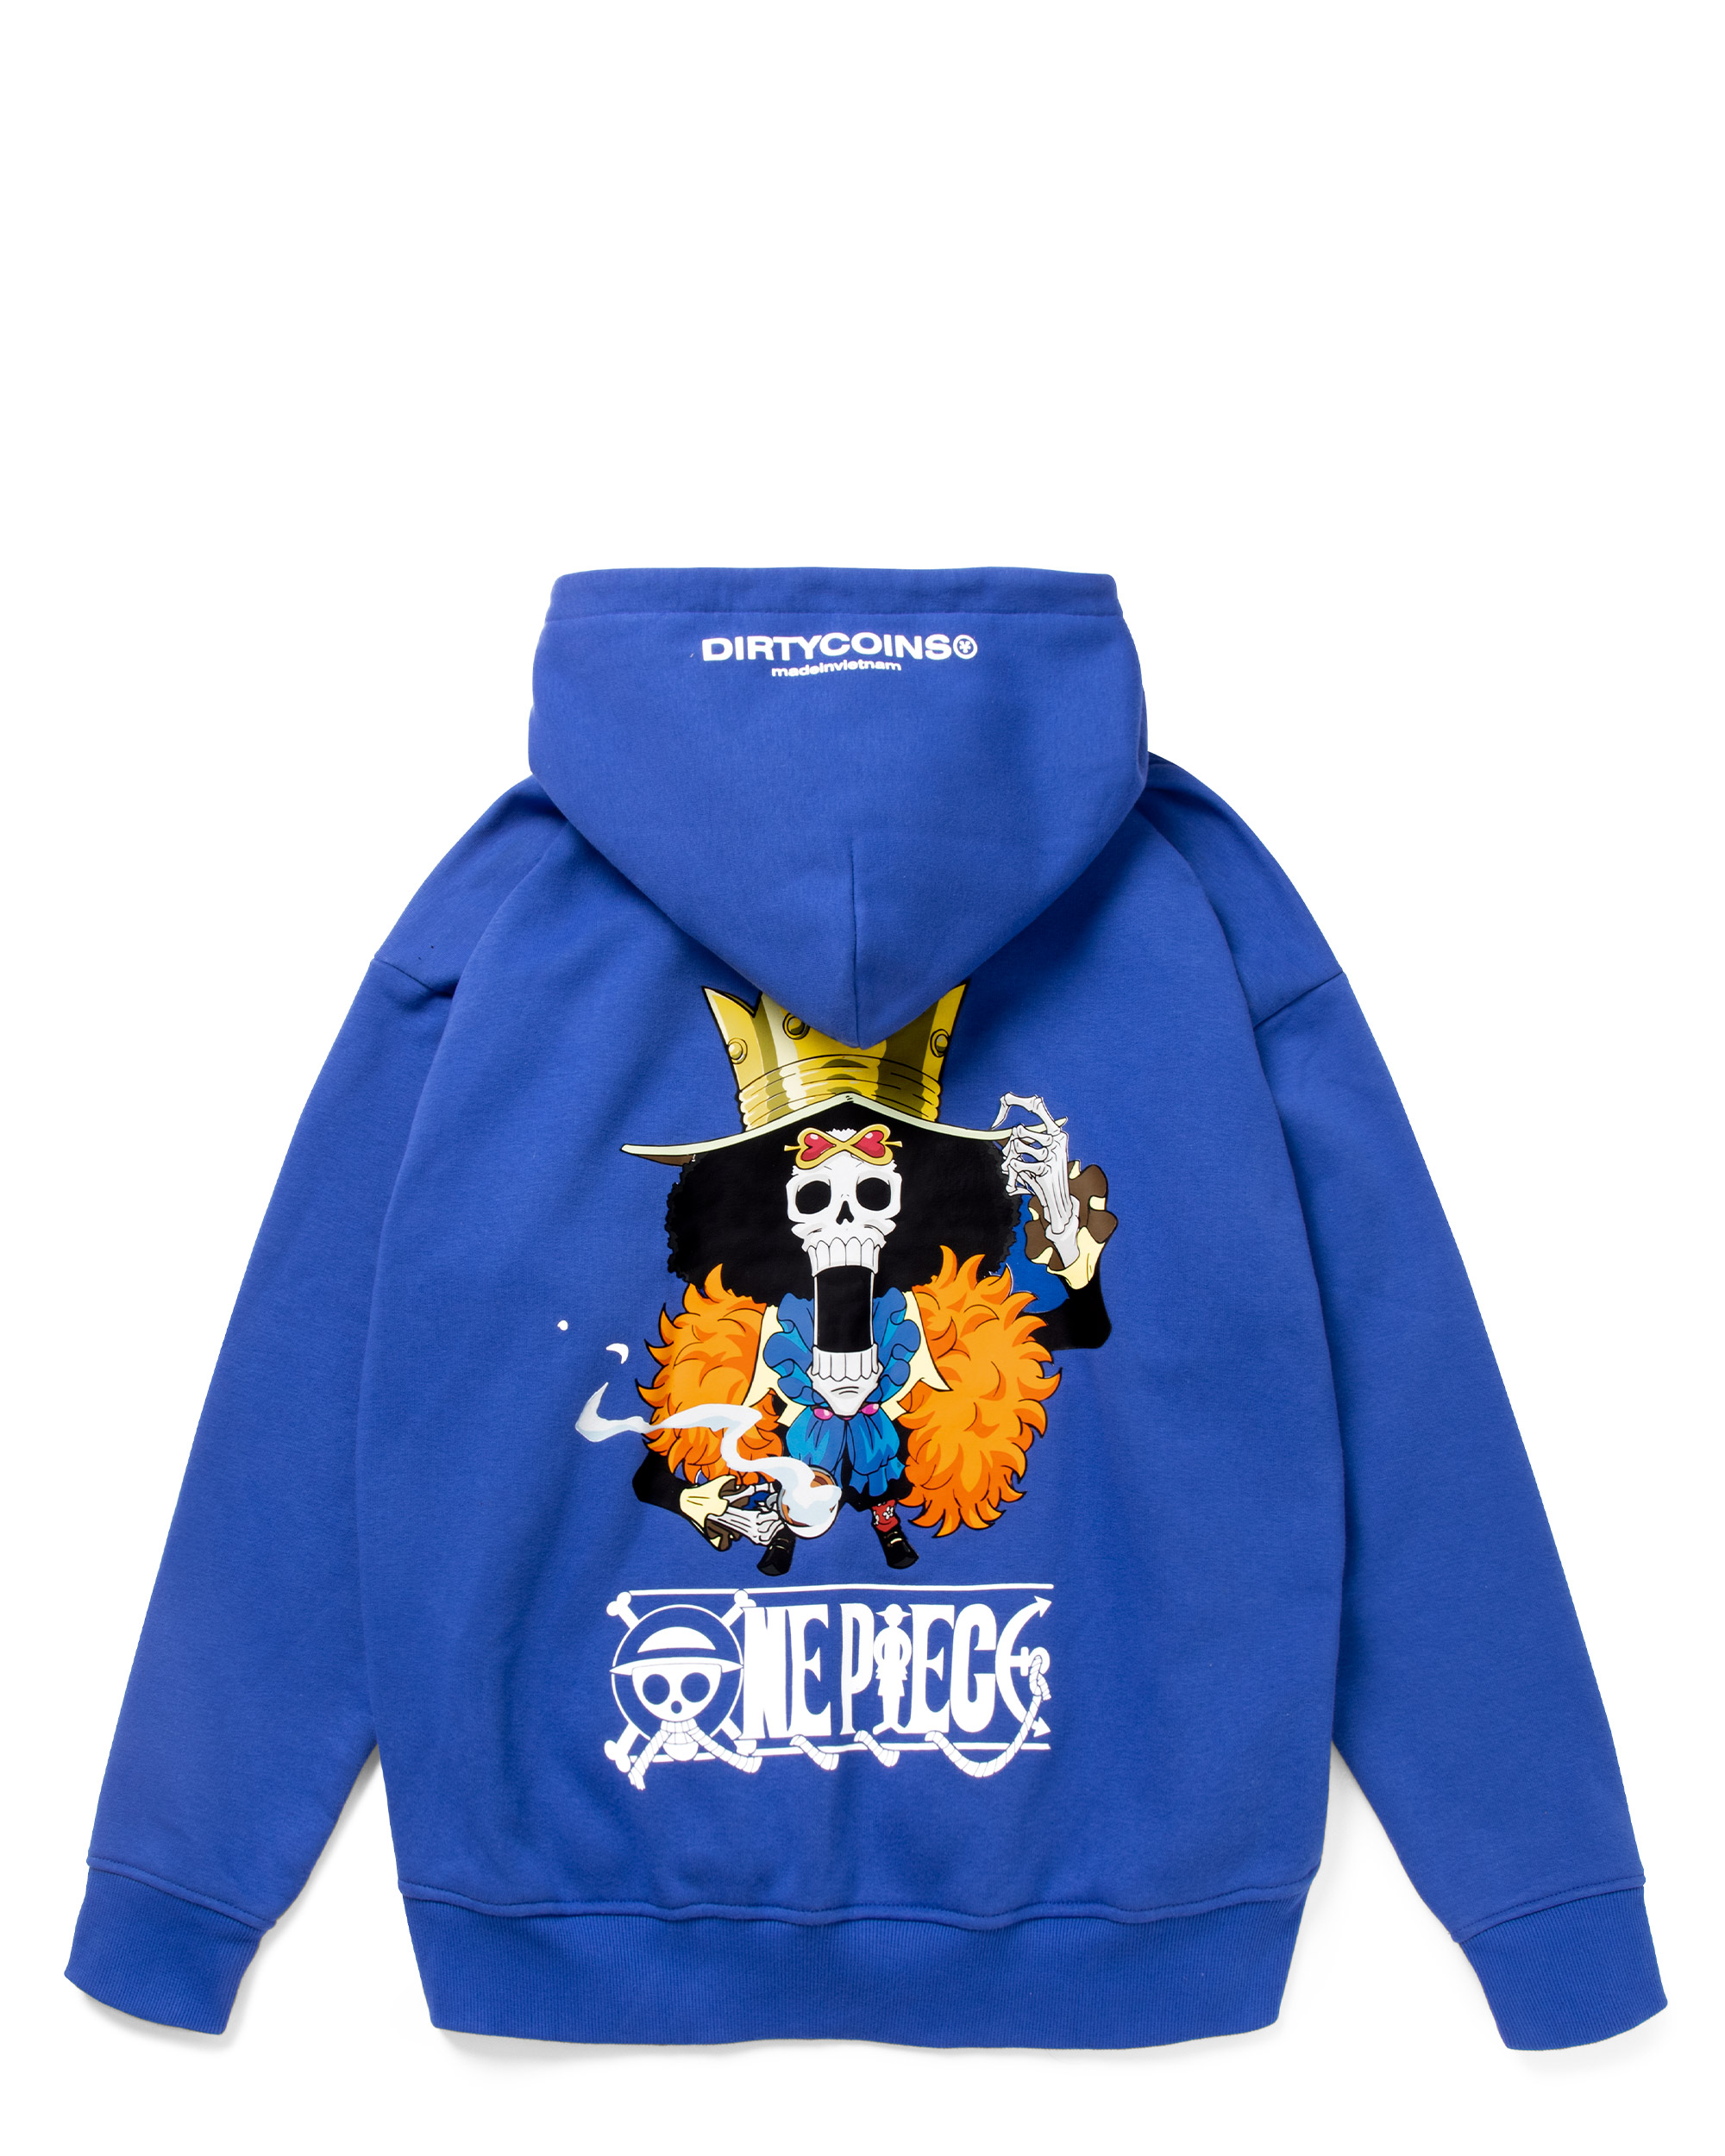 DIRTYCOINS X ONEPIECE COLLECTION 2022 - DirtyCoins | VIETNAMESE ...